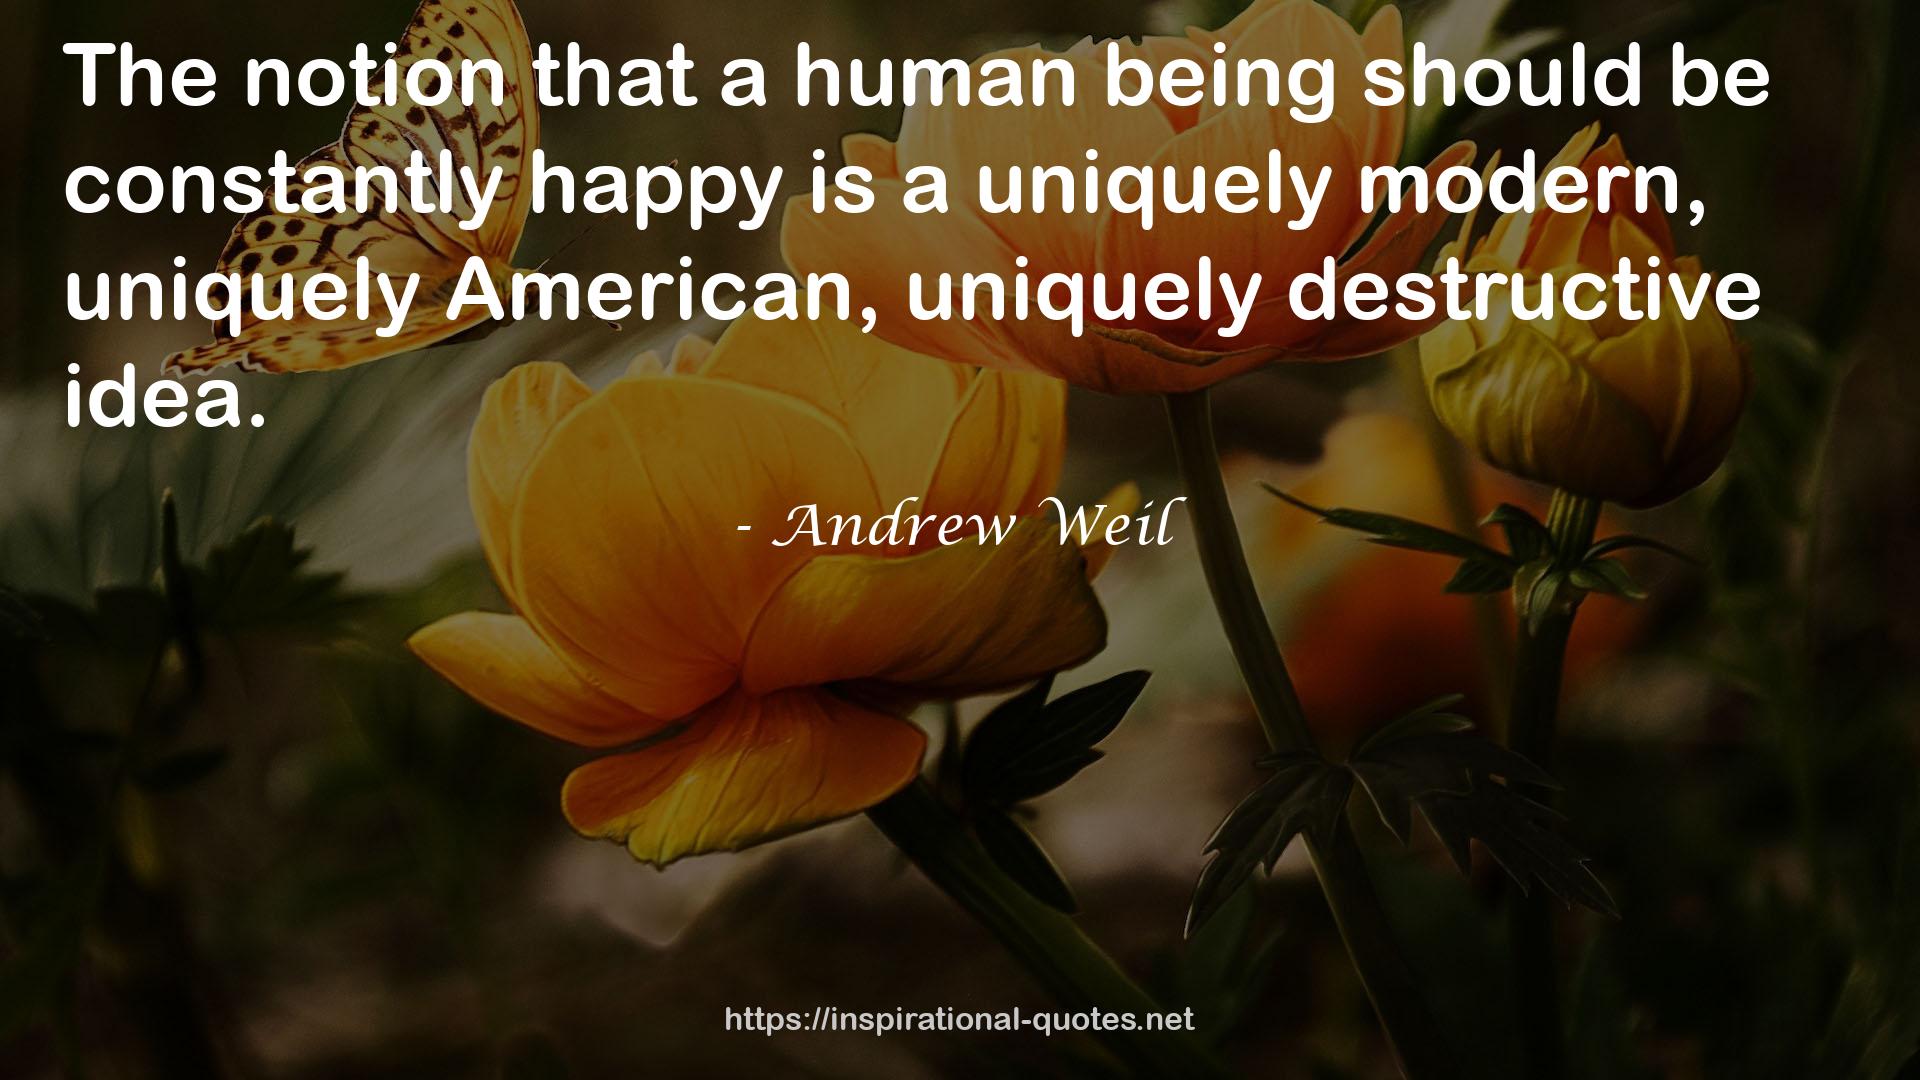 Andrew Weil QUOTES